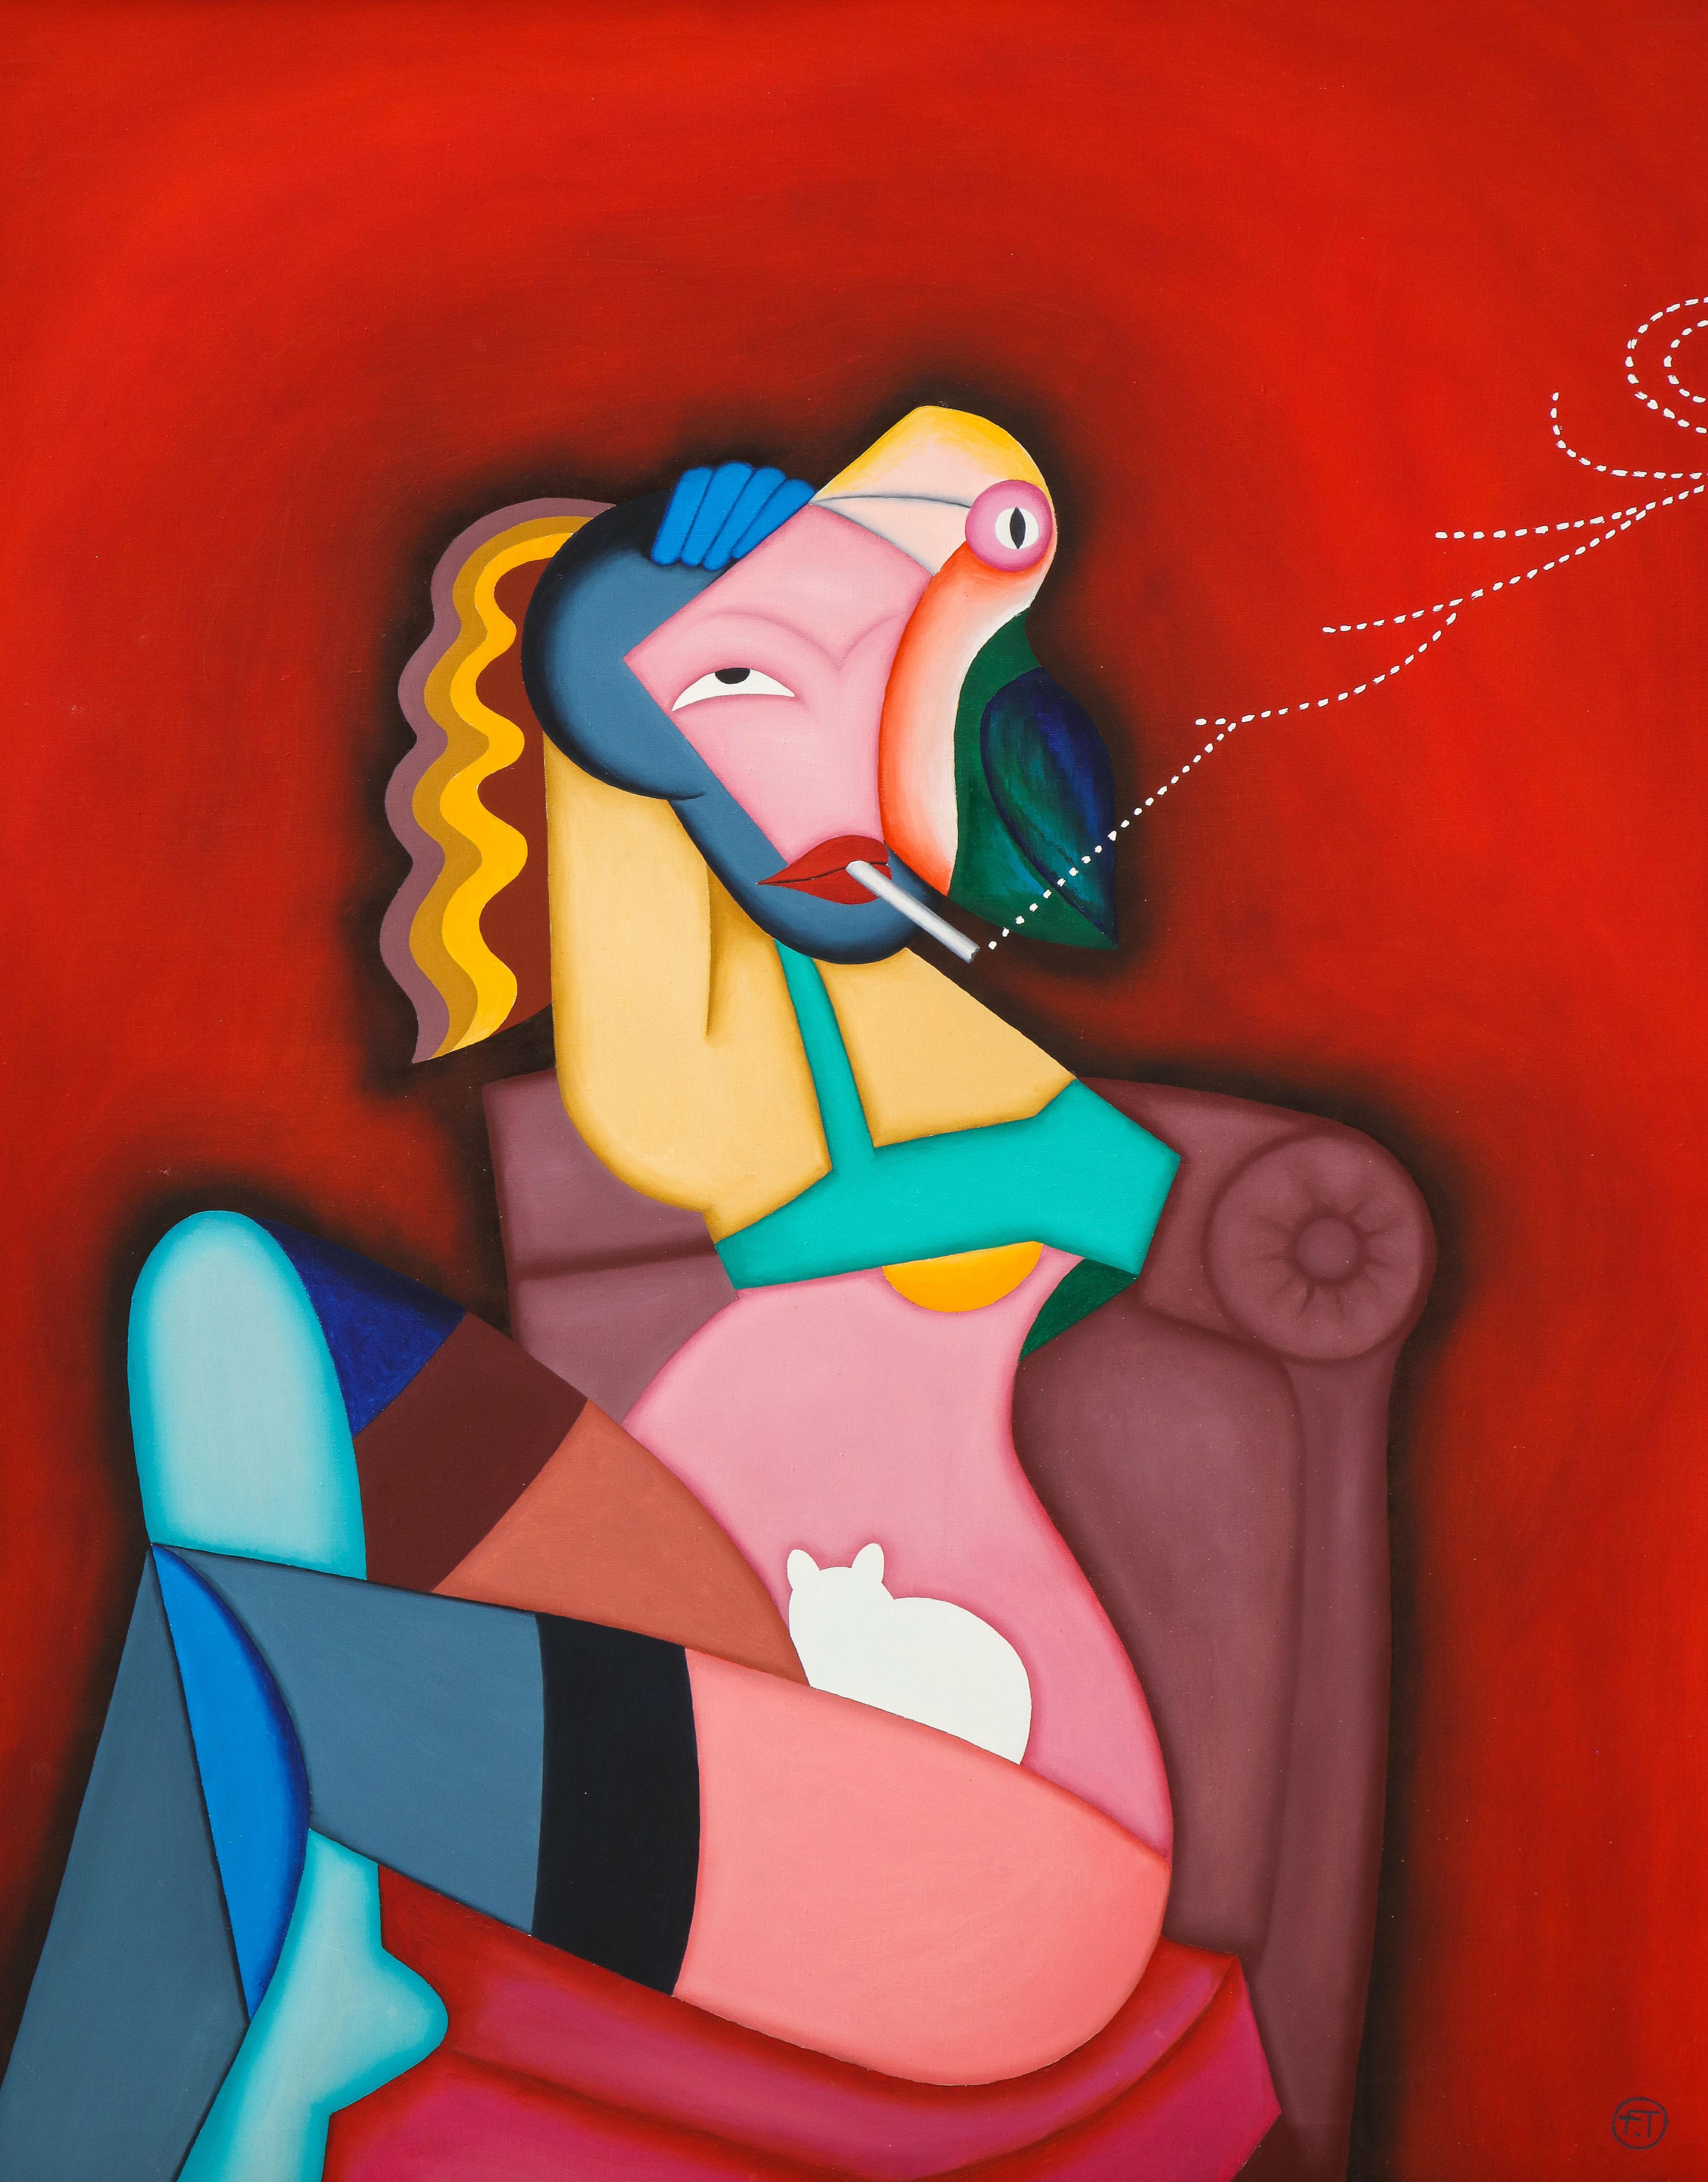 A fabulous seated woman scantily clad in green bra and stockings seated against a red background. A parrot sits enmeshed into her face and a white faceless pussy. A twisting broken line of smoke smolders from her cigarette. Cubist manner, bearing